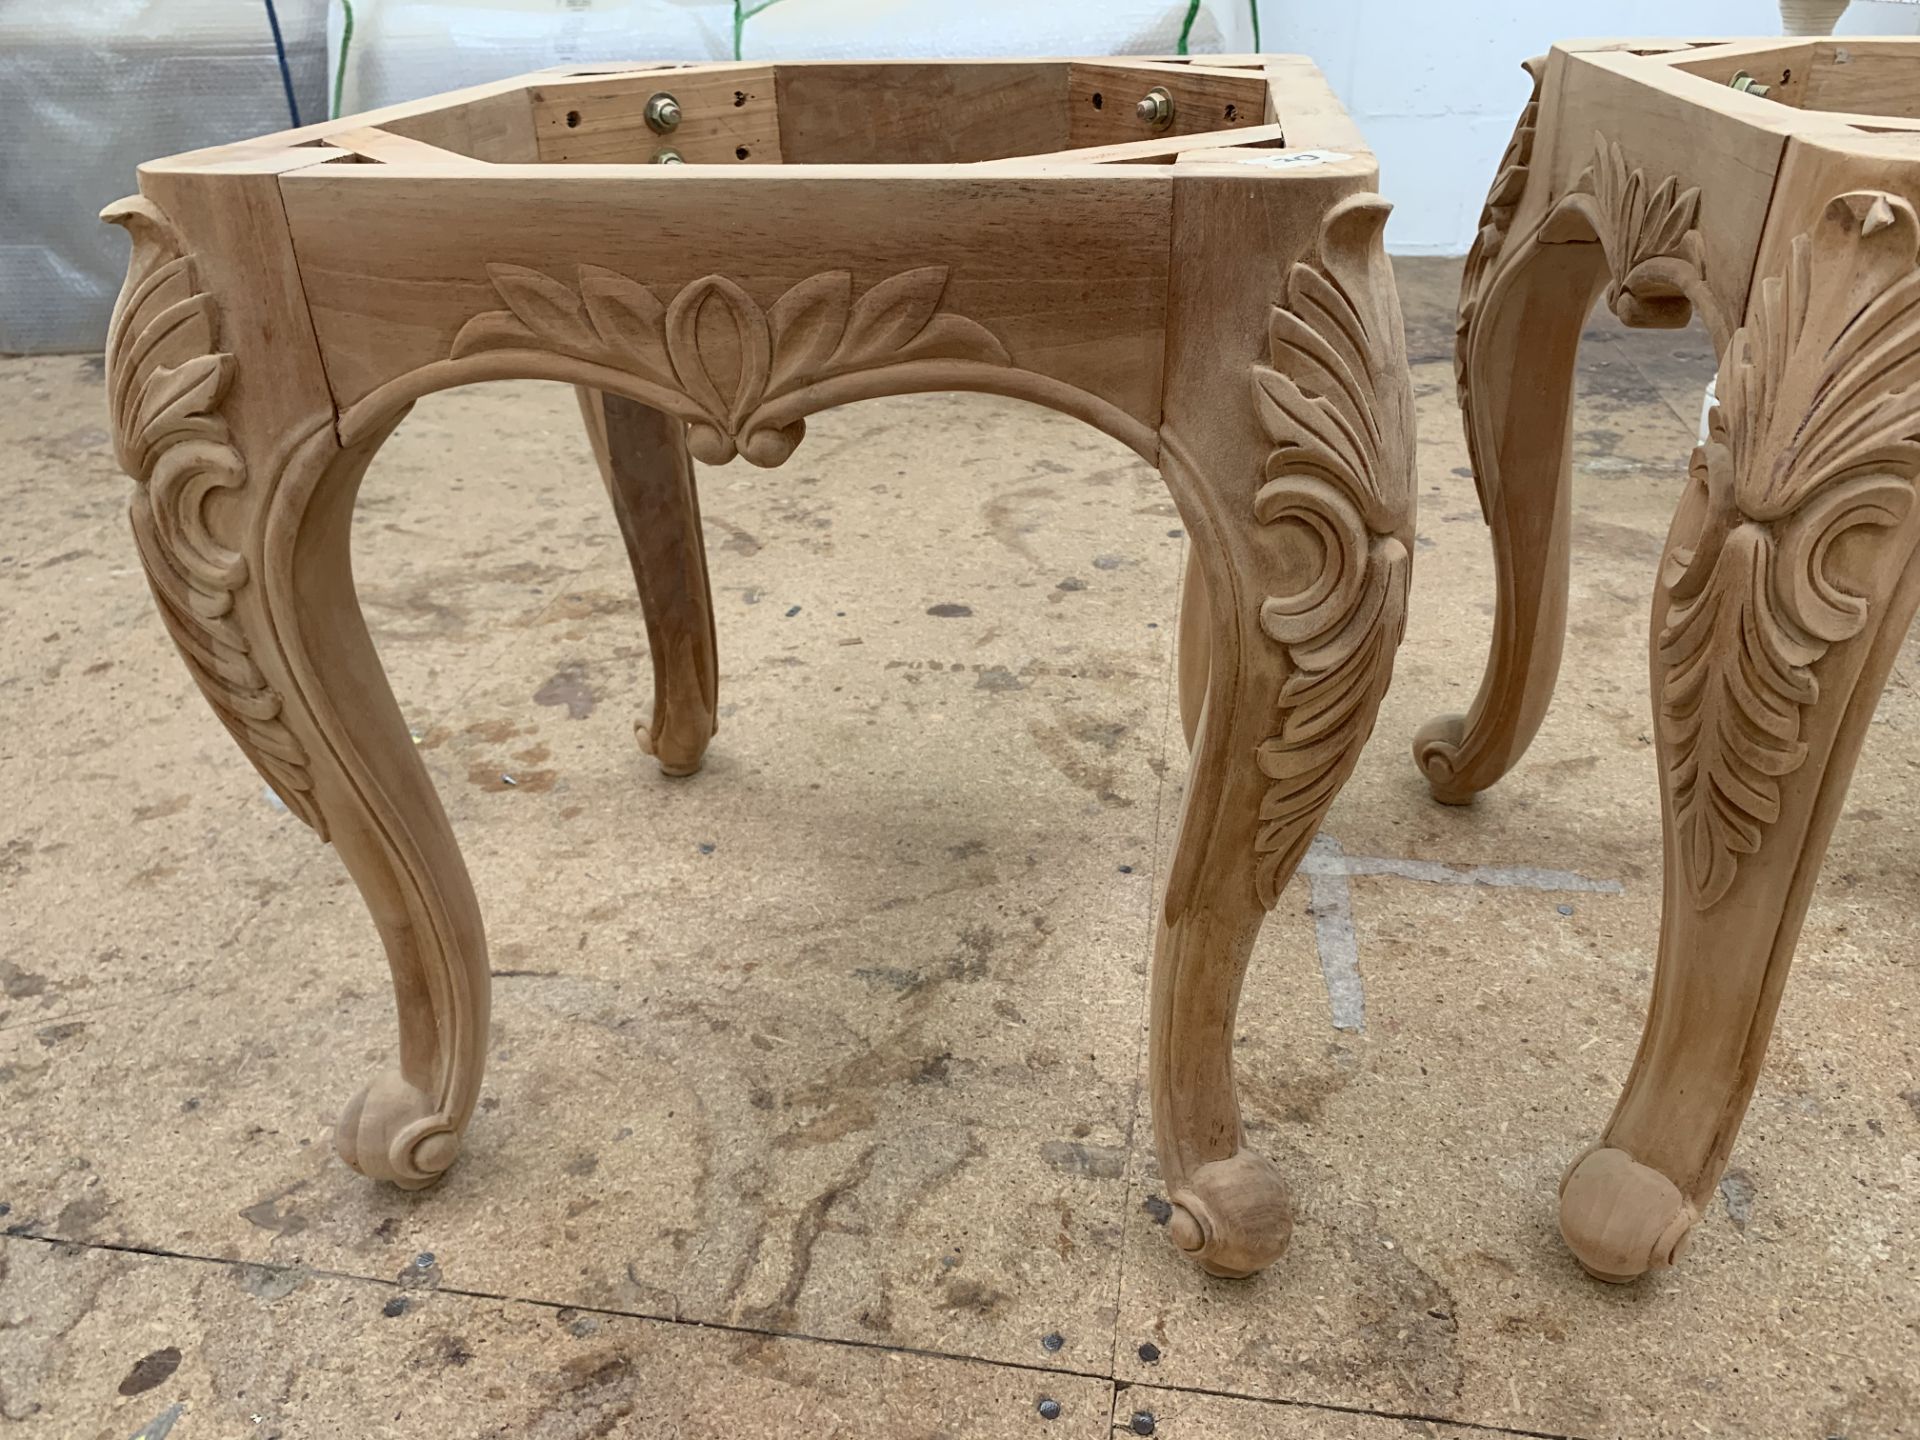 Carved square small Table or Stool base, approx 2', requires finishing/polshing. - Image 3 of 5